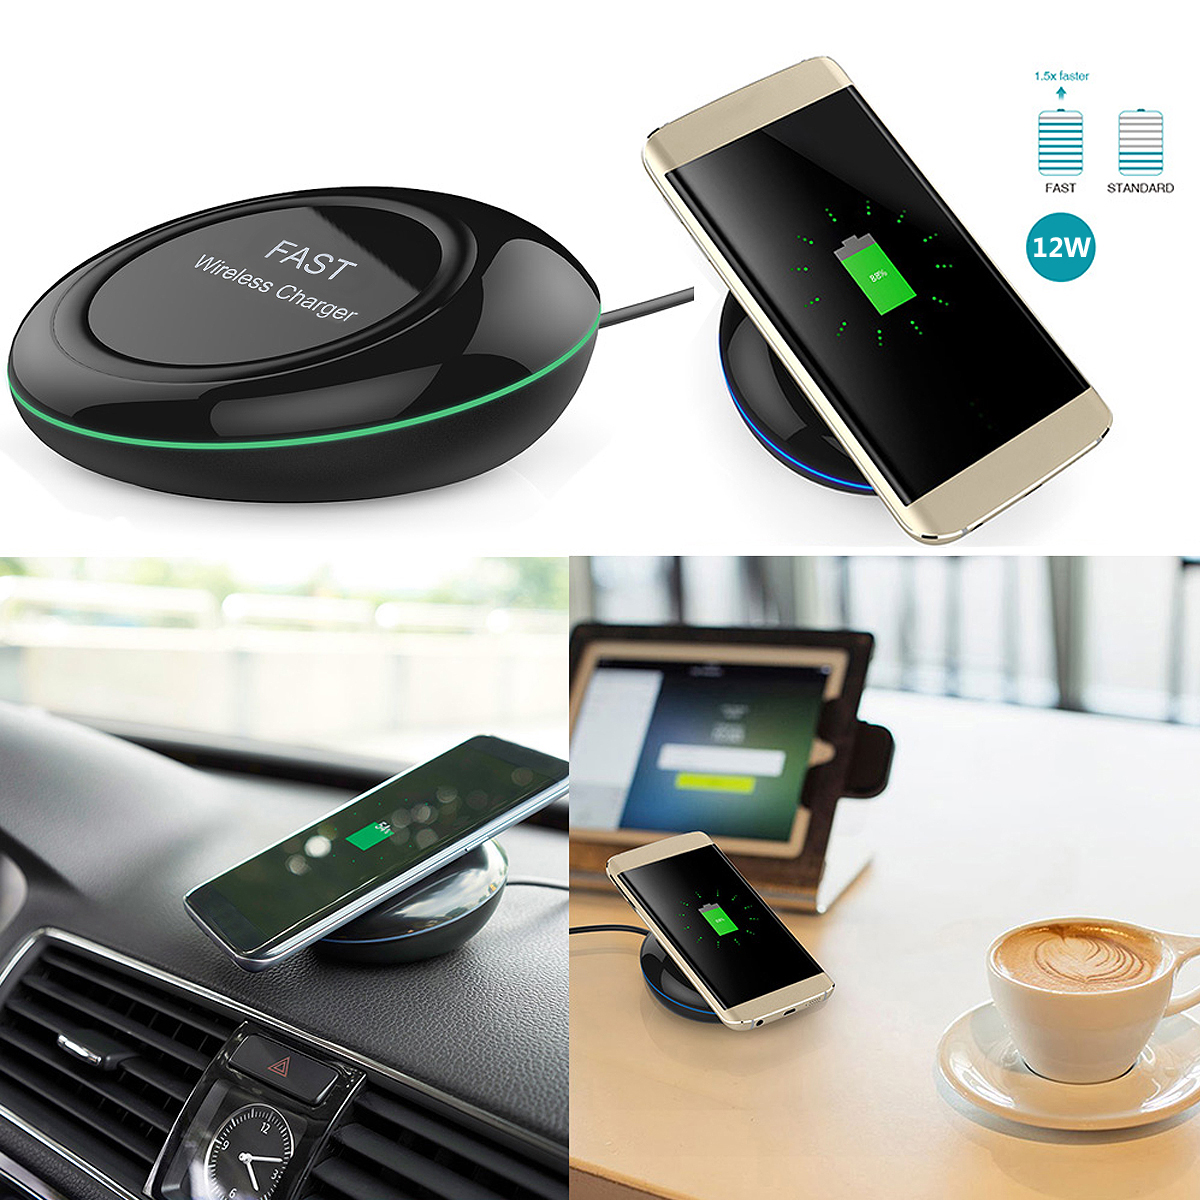 Bakeey-Qi-Wireless-Fast-Charger-With-LED-Indicator-For-iPhone-X-8Plus-Samsung-S7-S8-Note-8-1217829-7